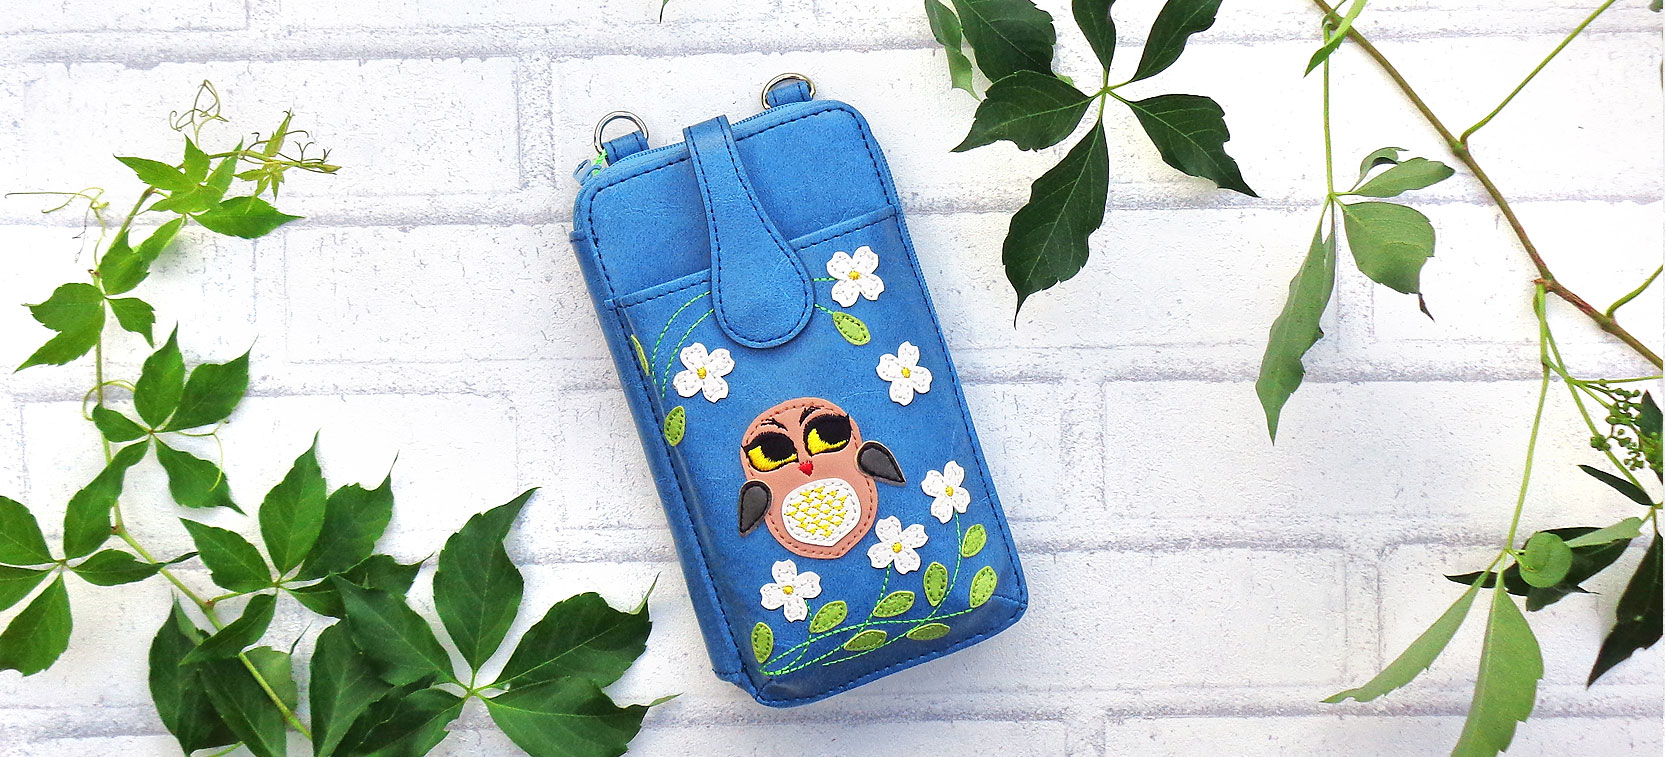 Owl Cell Phone Wallet by Lavishy